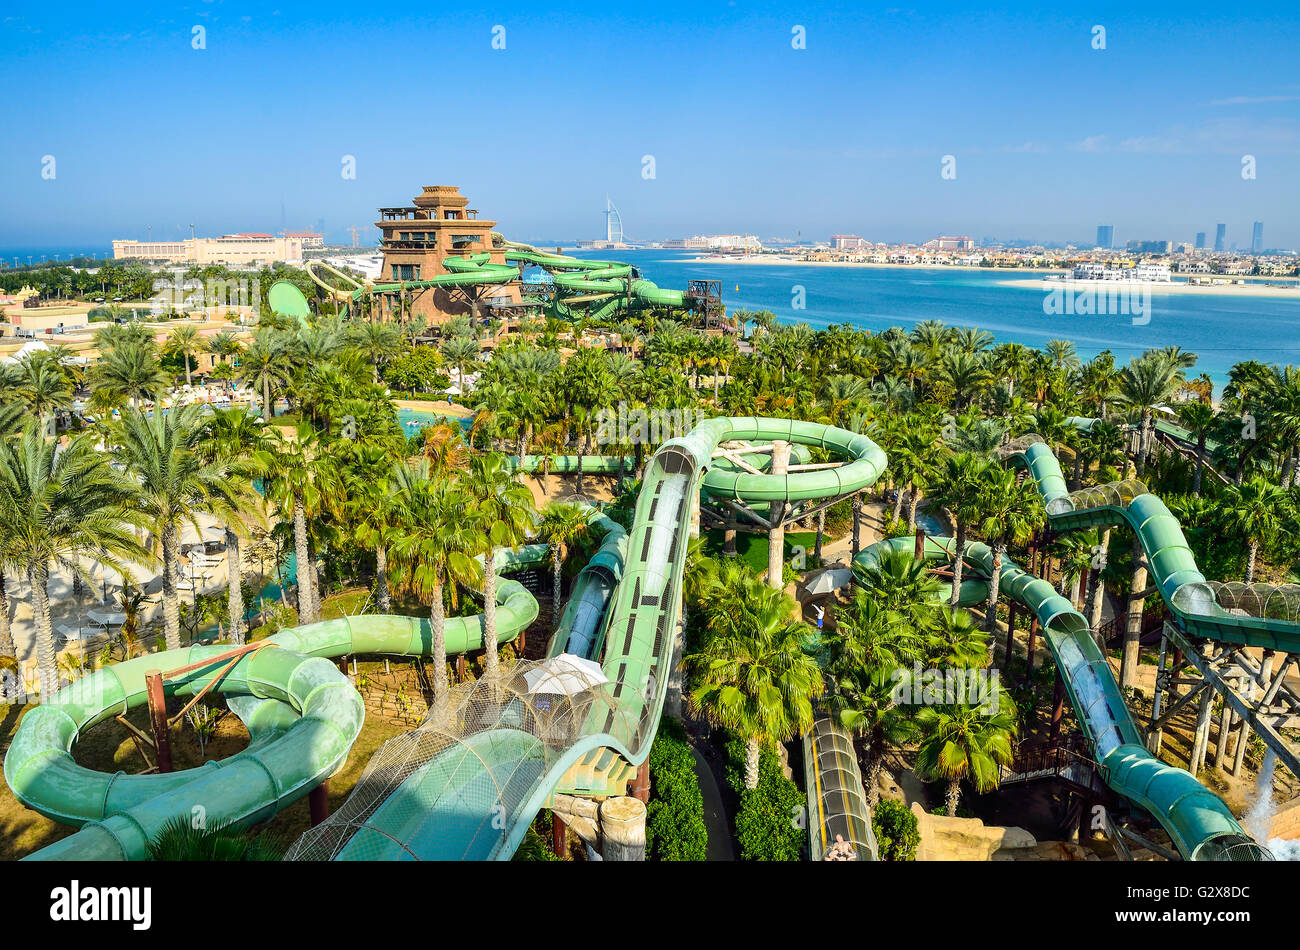 Aquaventure Waterpark in Atlantis. The Palm is the best Water Park in Dubai, packed with world first, record breaking rides. Stock Photo